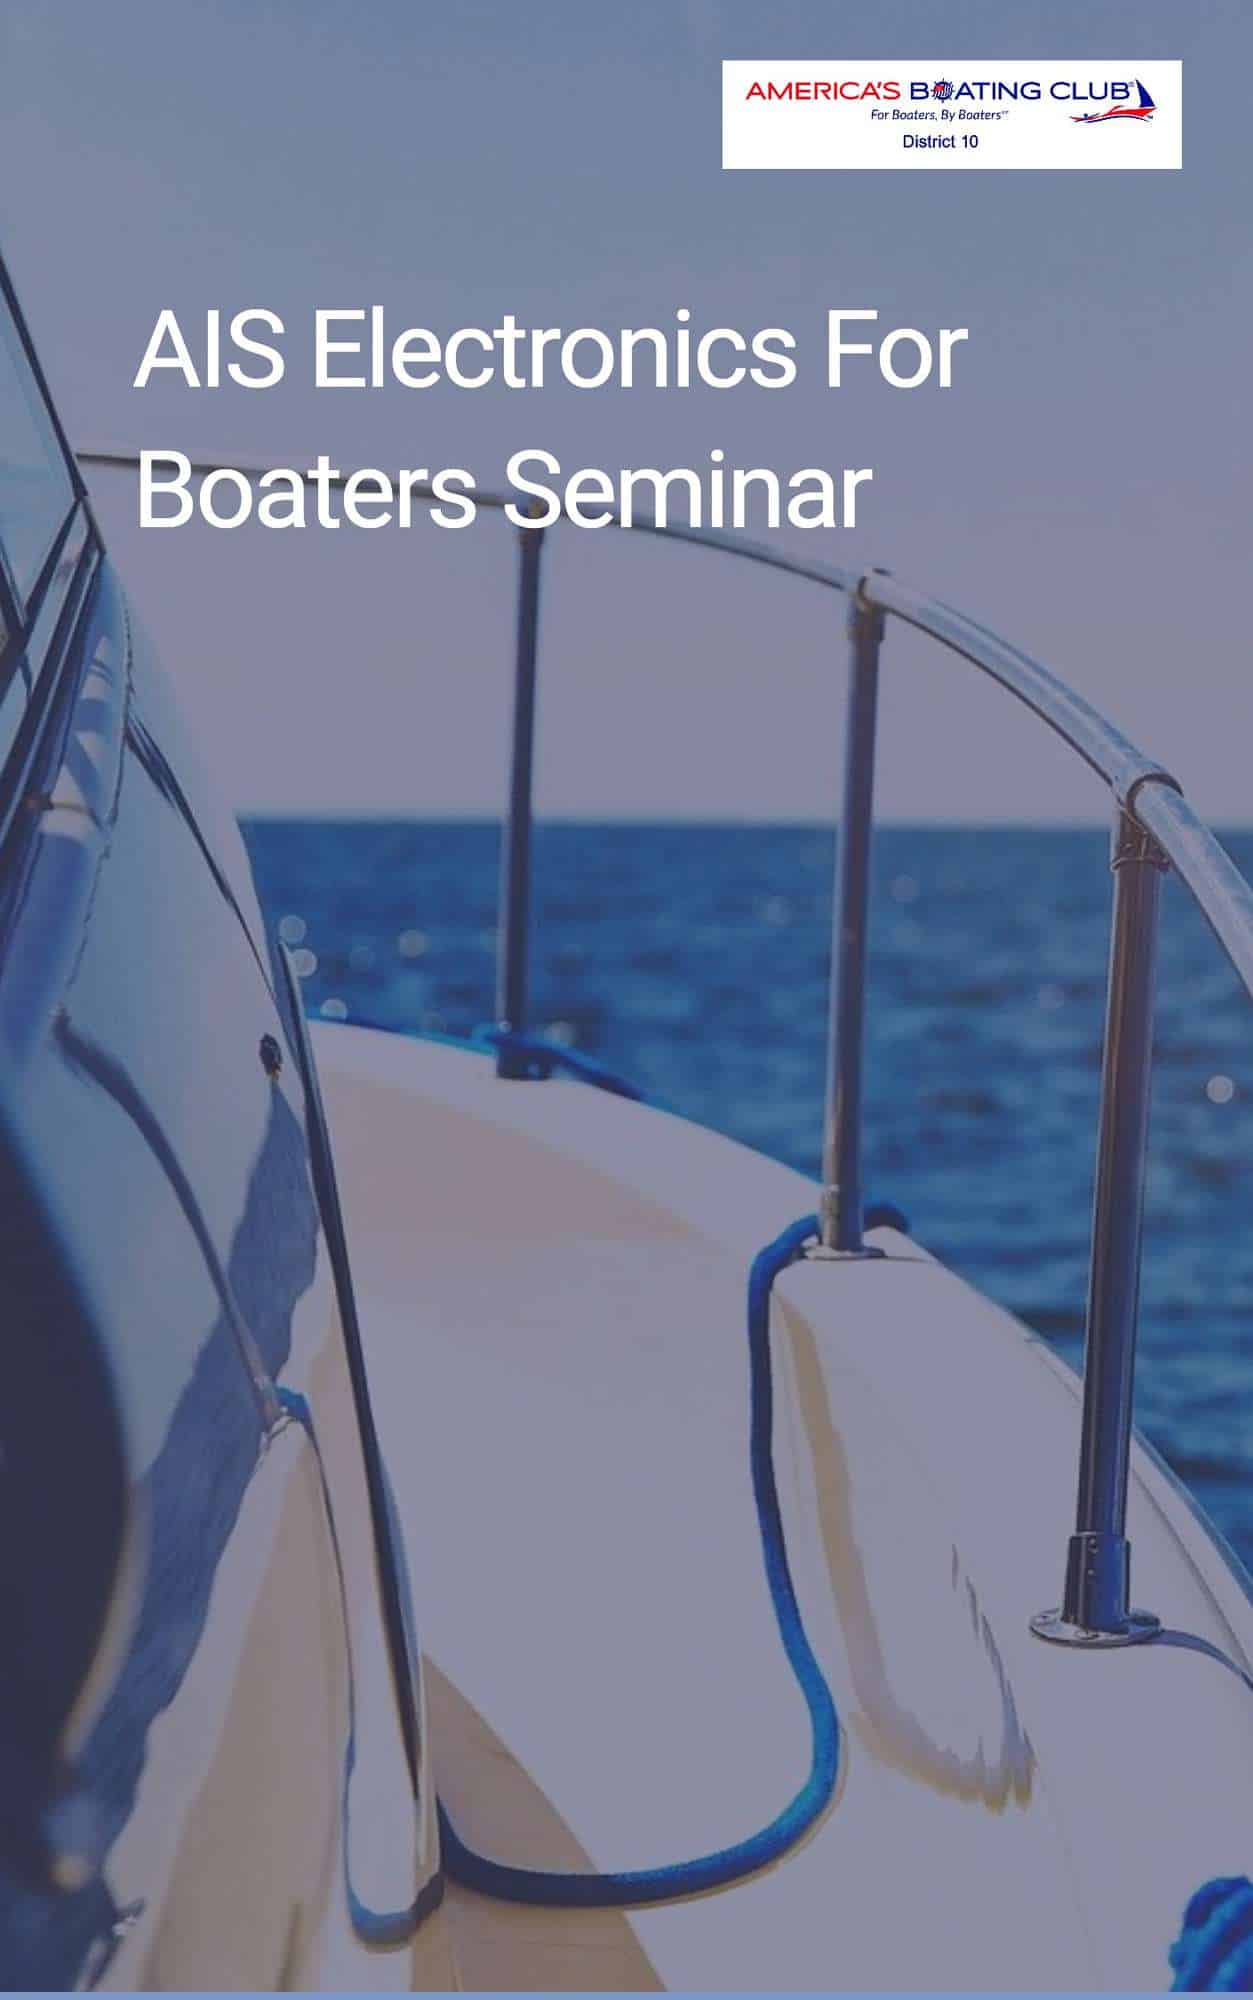 ais electronics for boaters seminar